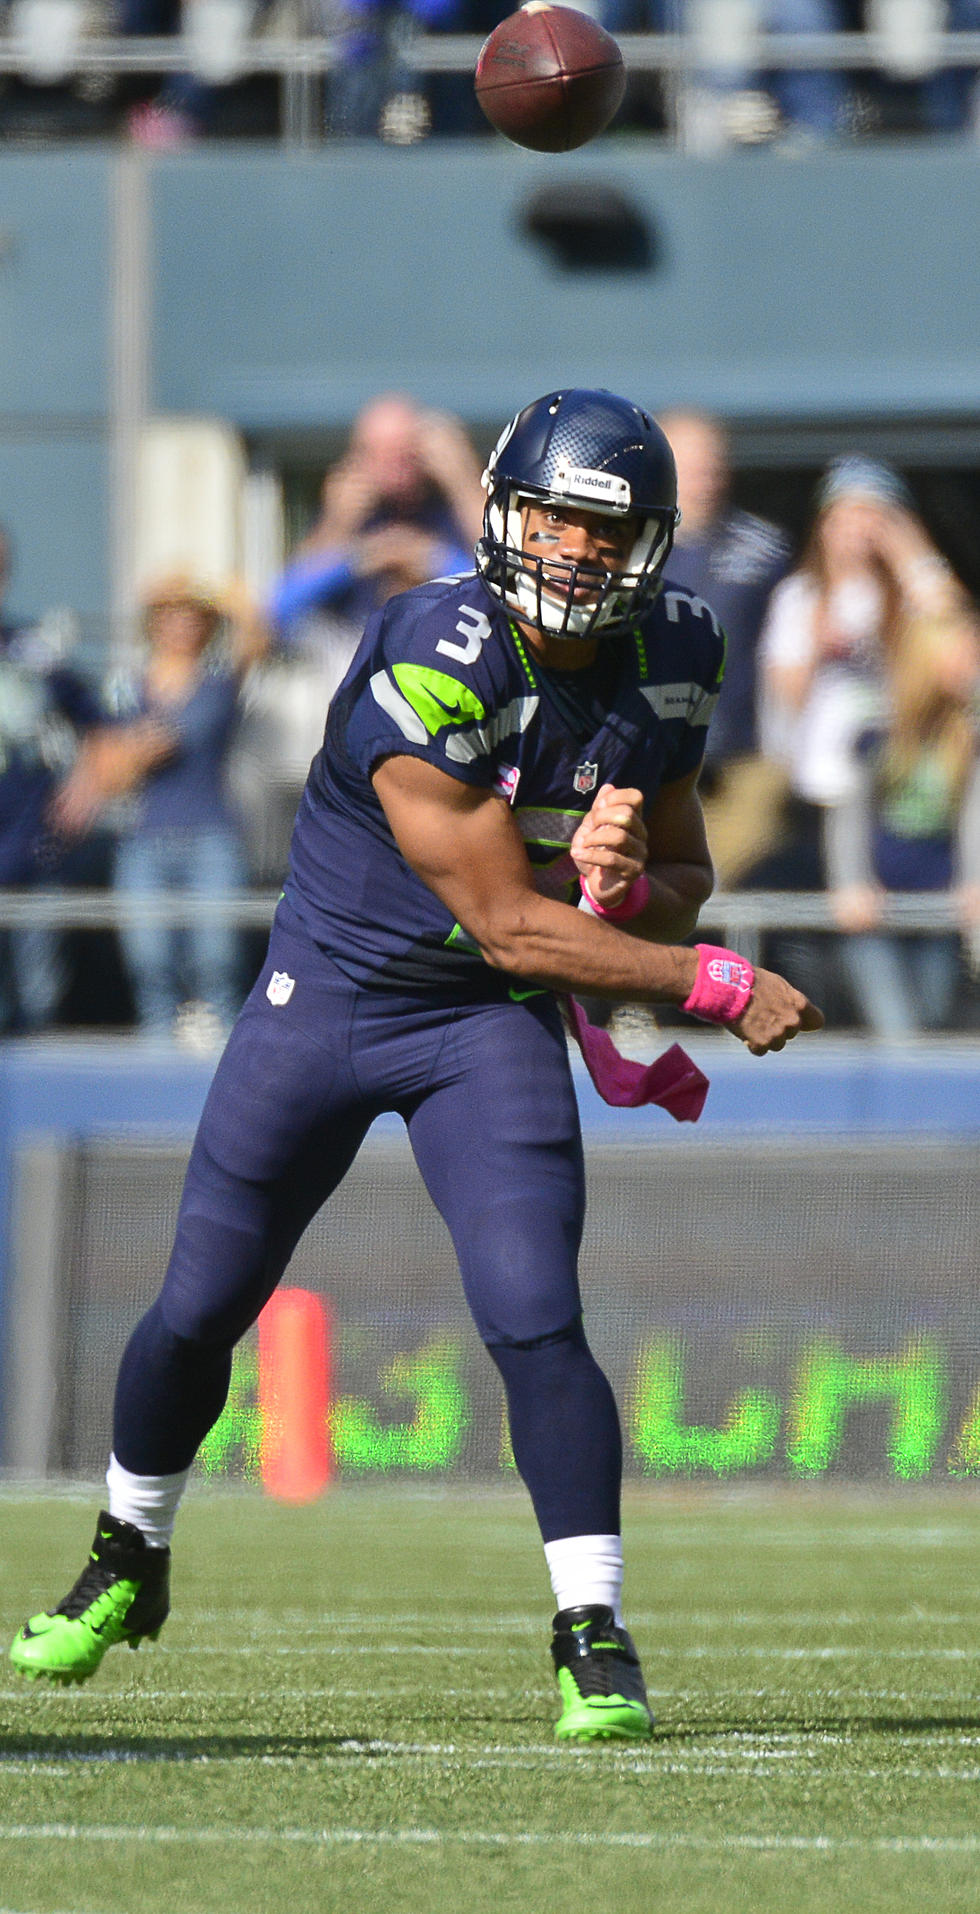 Alaska Airlines Pays Tribute to Spokesperson Russell Wilson on Planes